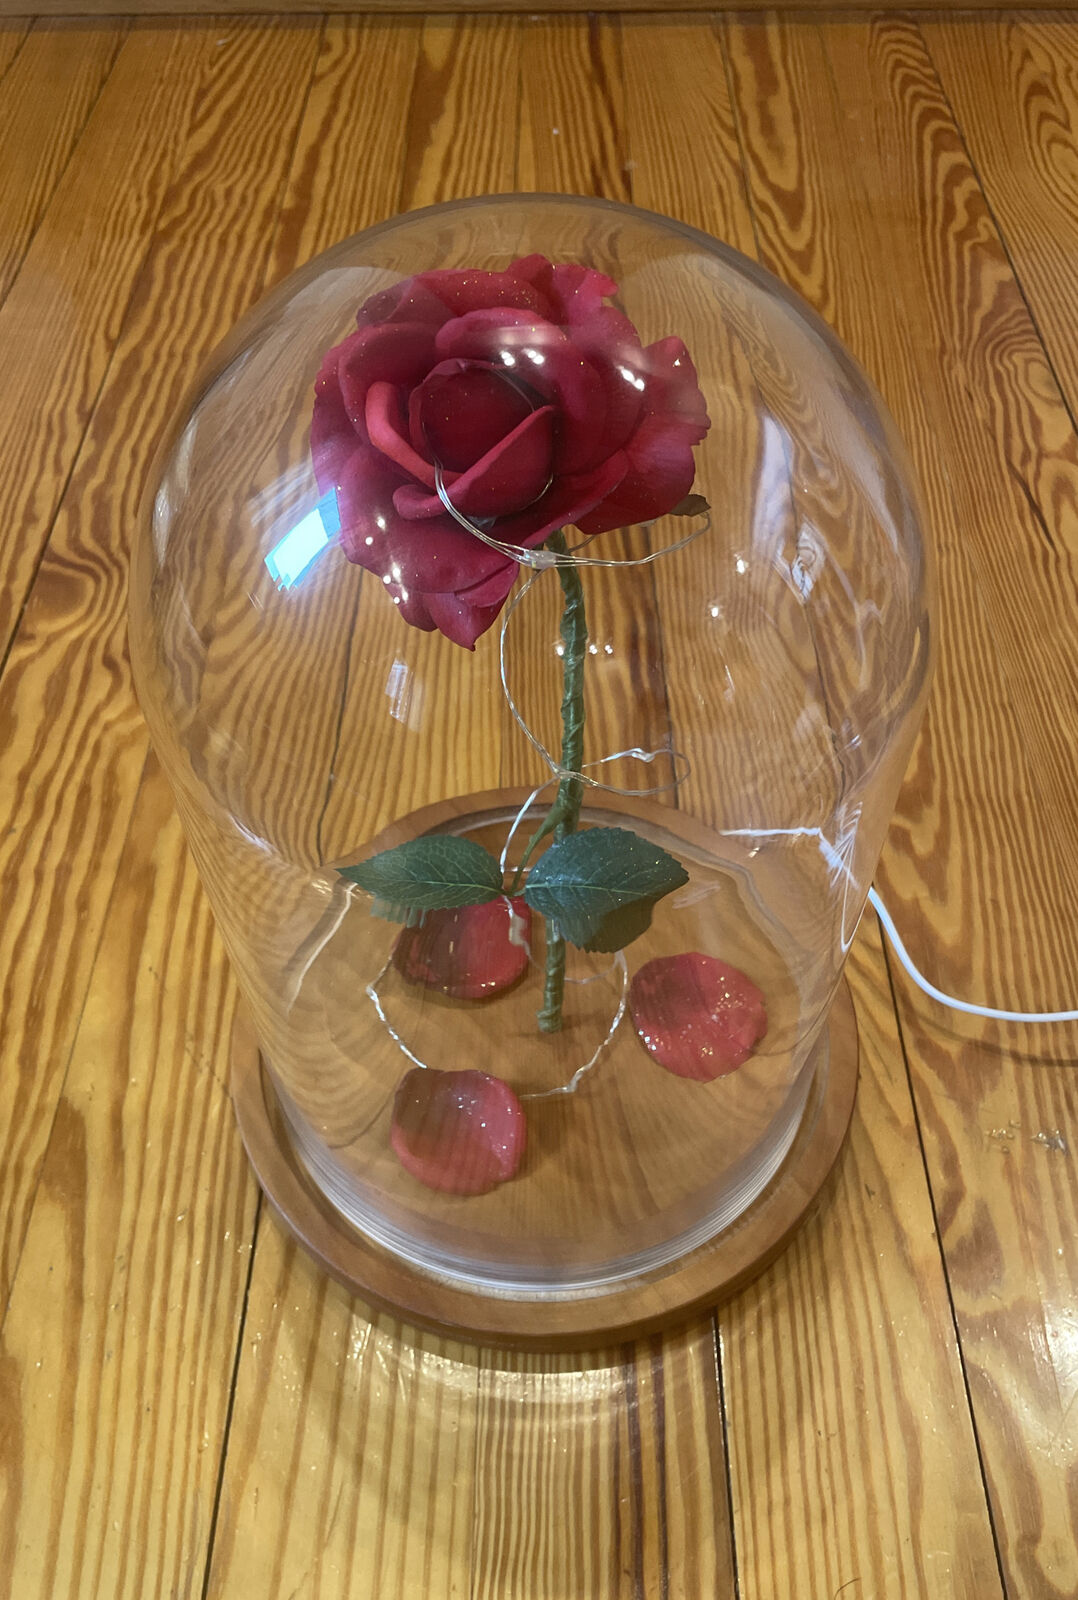 EUC Beauty and The Beast Rose - Enchanted Red Rose in Glass Dome with LED